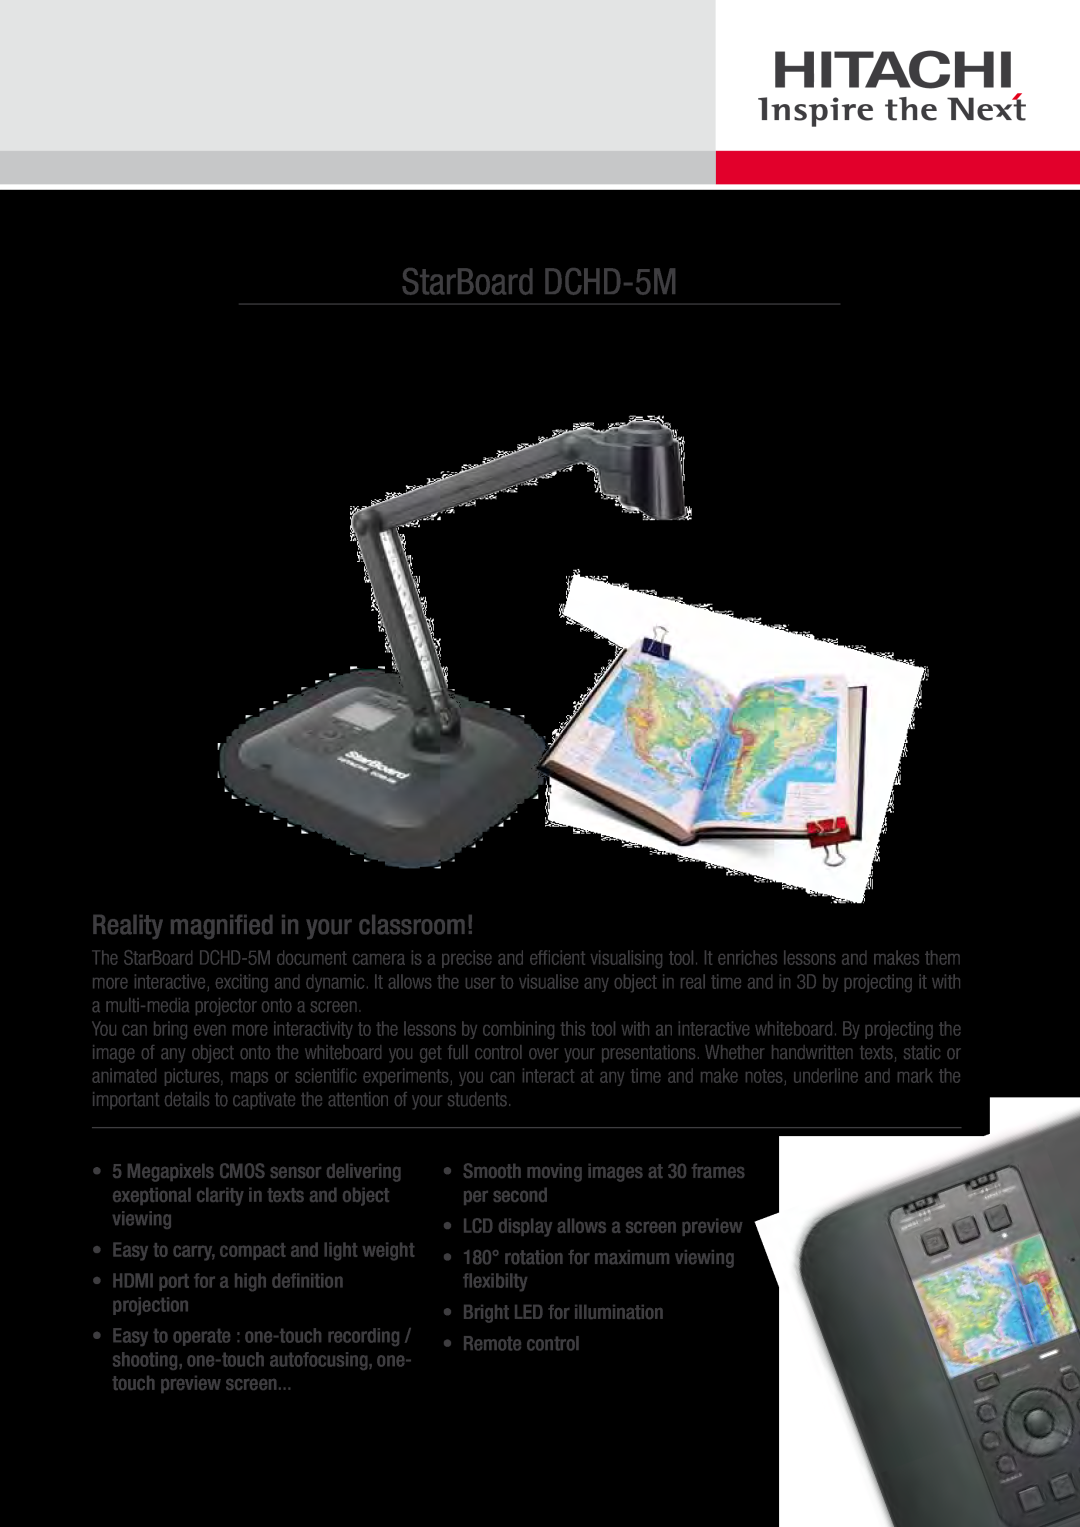 Hitachi manual Reality magnified in your classroom, Compact High-Definition Visual Presenter, StarBoard DCHD-5M 